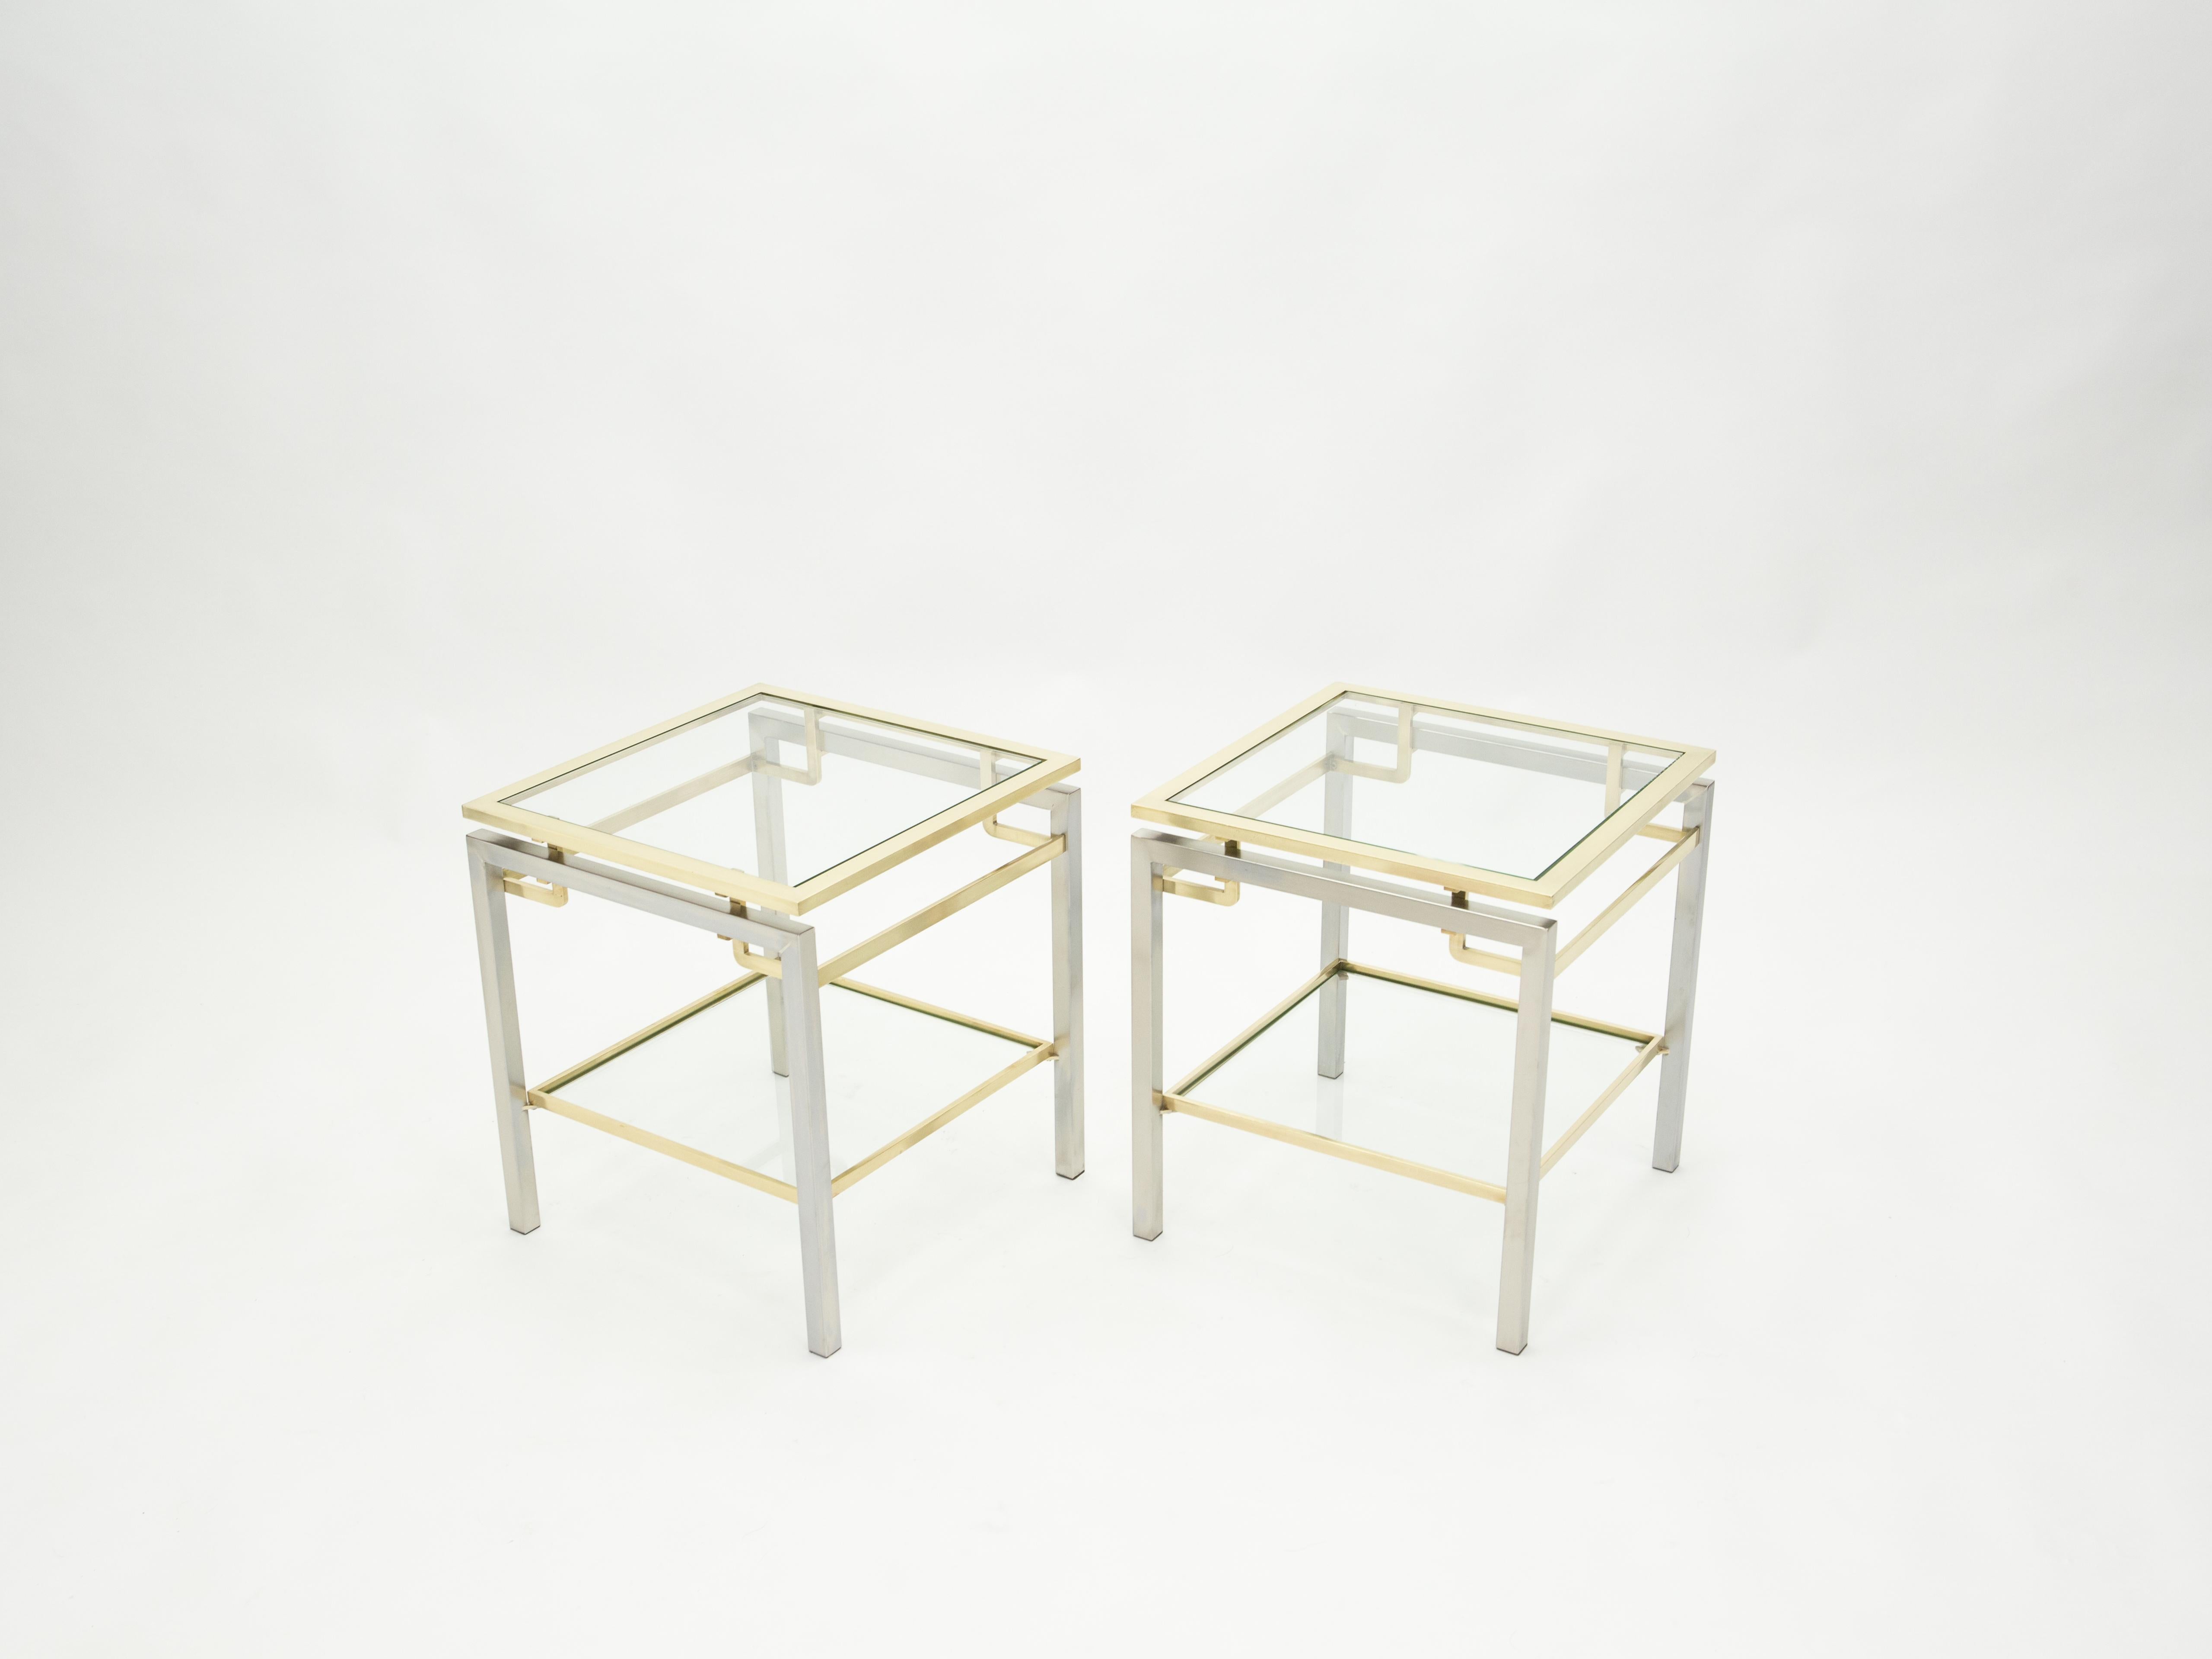 Simple lines point to these two-tier end tables French midcentury roots. Designed by Guy Lefevre for Maison Jansen, it features smooth steel legs with brass top and accents, and transparent glass tops. Its symmetry, elevated glass, and strong